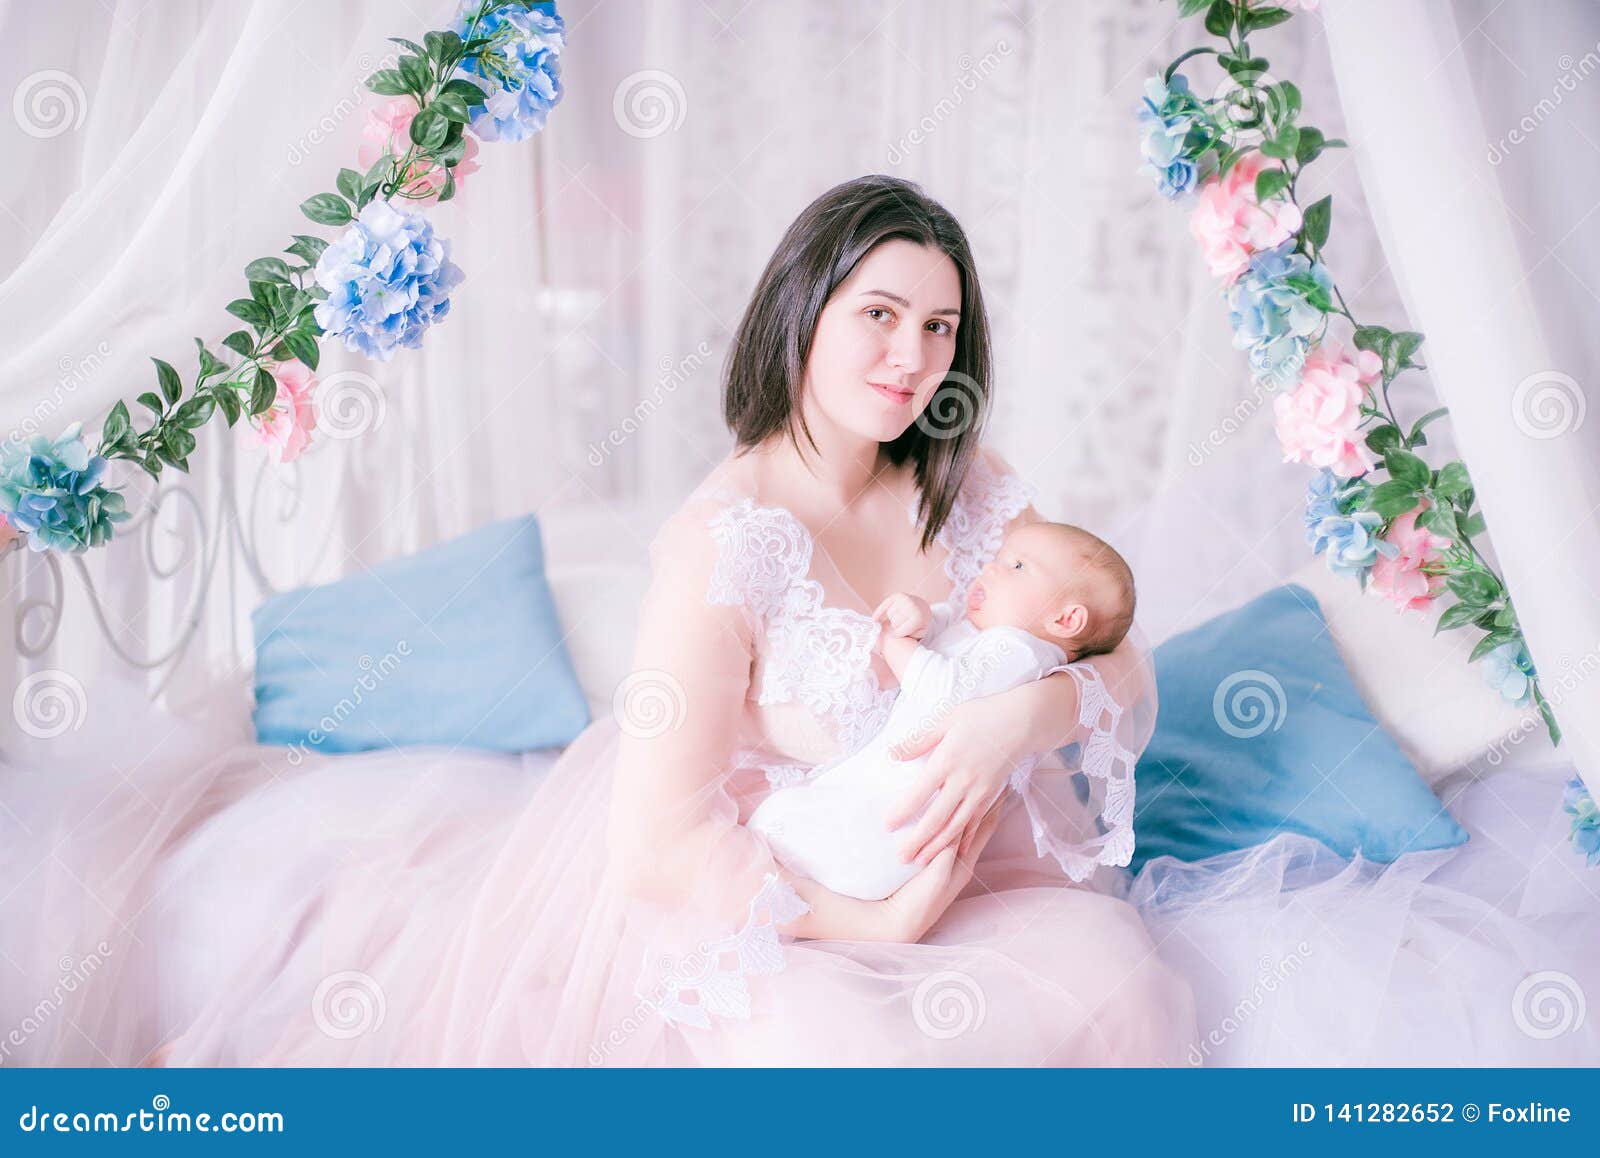 Young Mother In A Boudoir Dress With A Baby In Her Arms By The Canopy Bed Stock Photo Image Of Beauty Beautiful